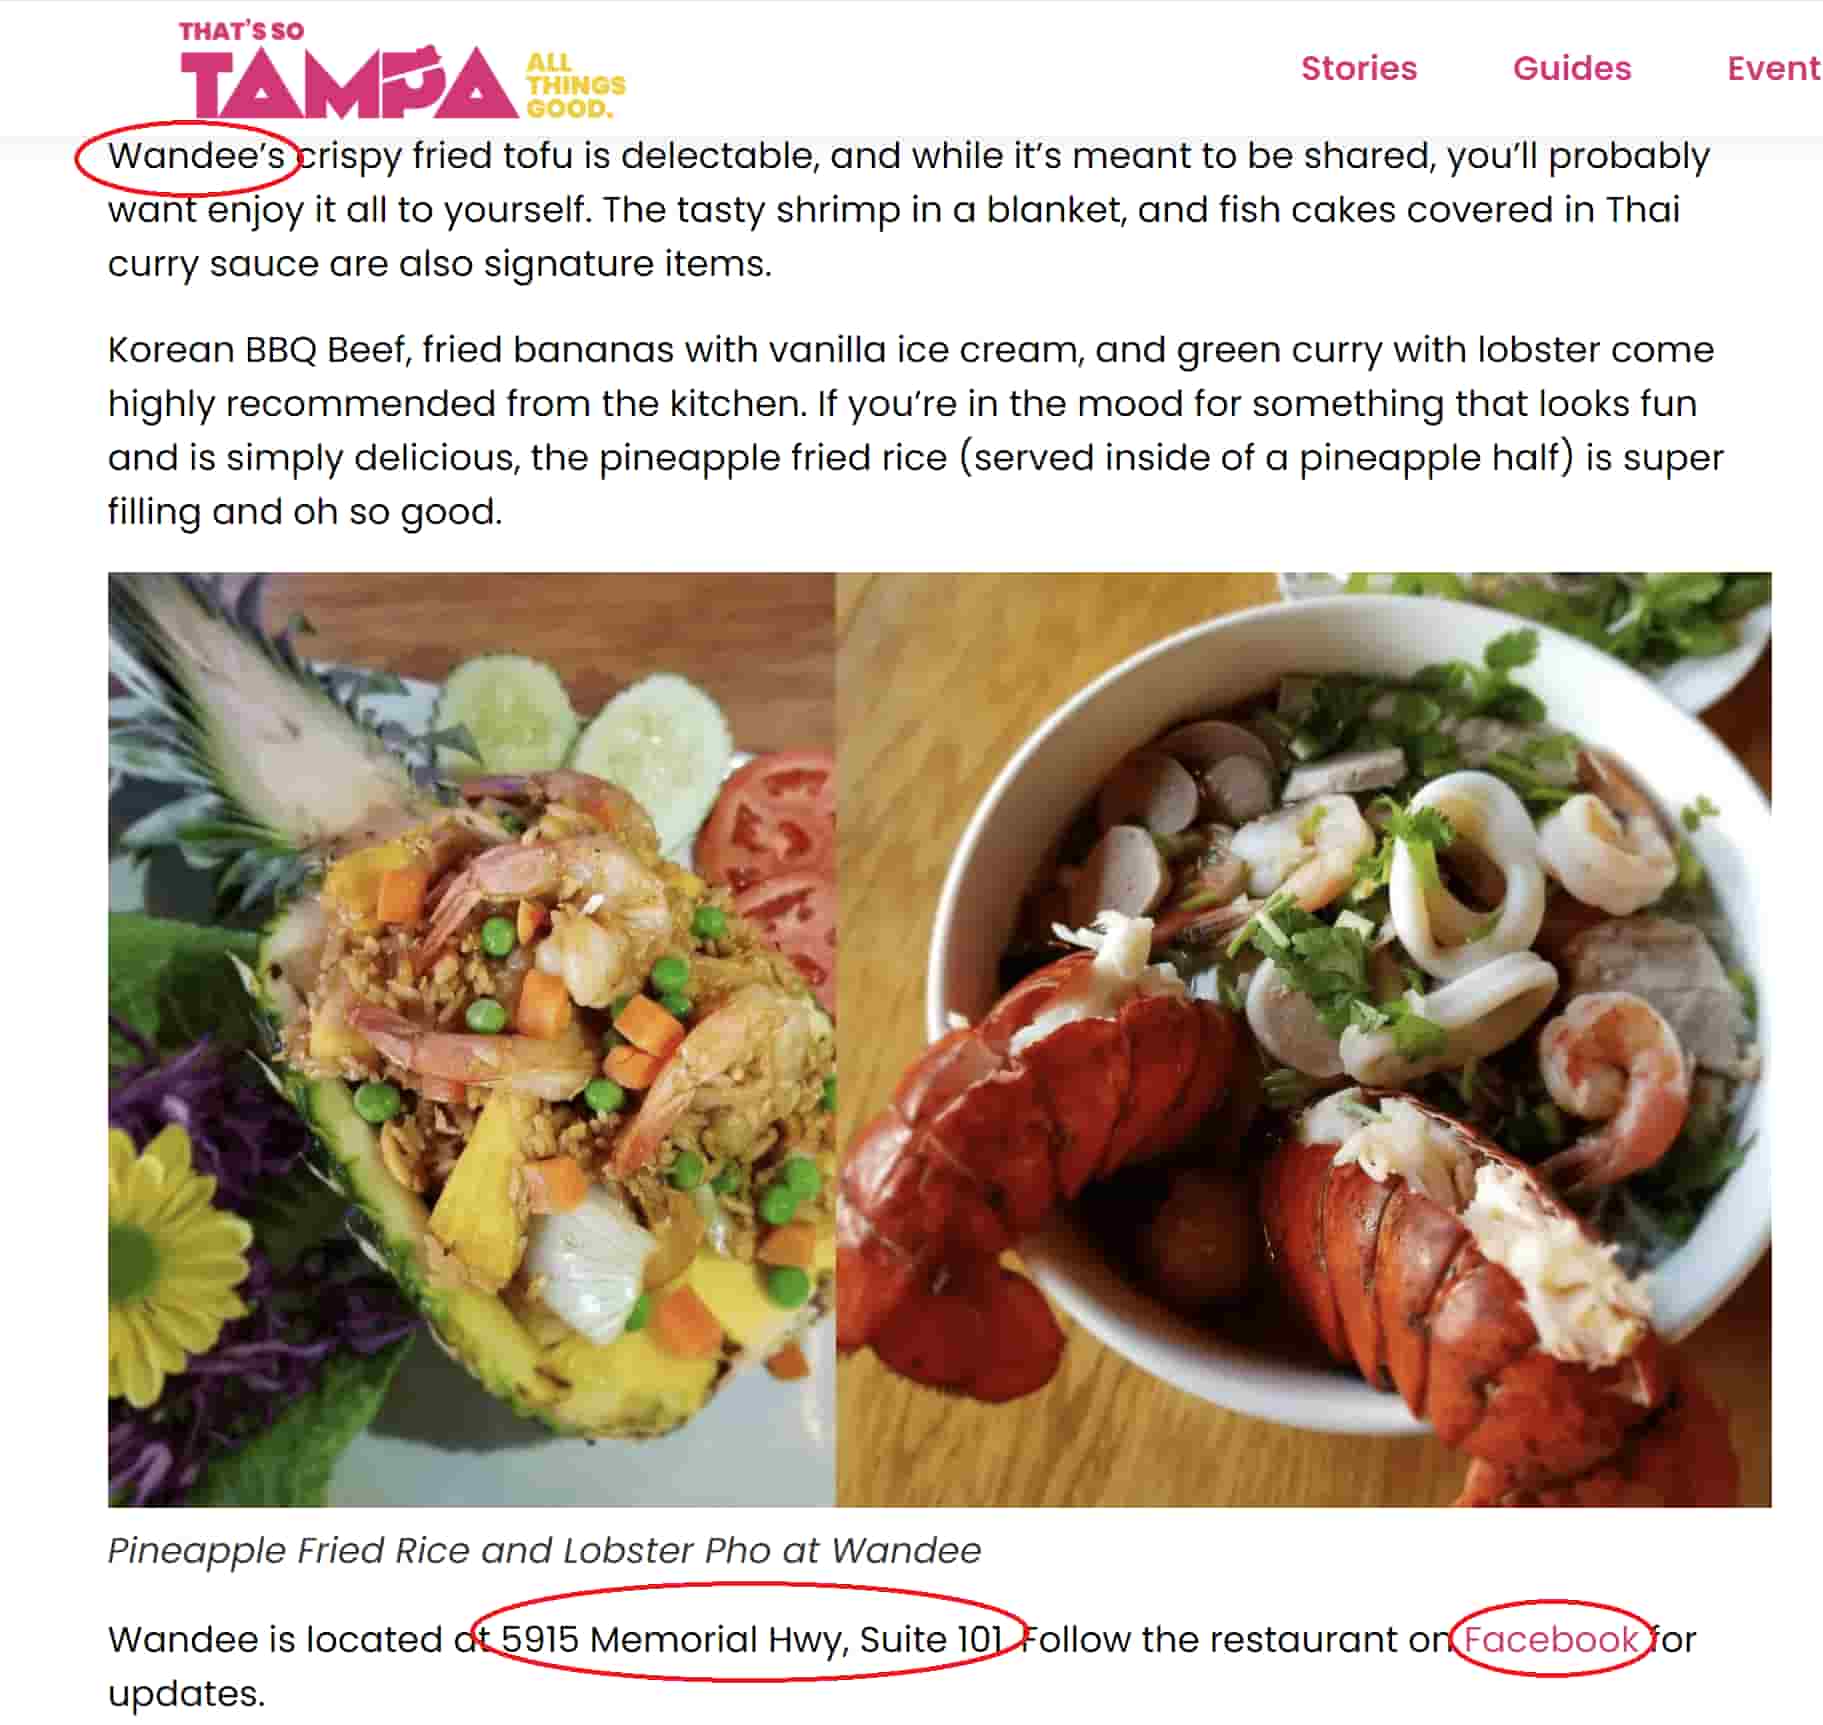 Local citations in article about Tampa restaurant